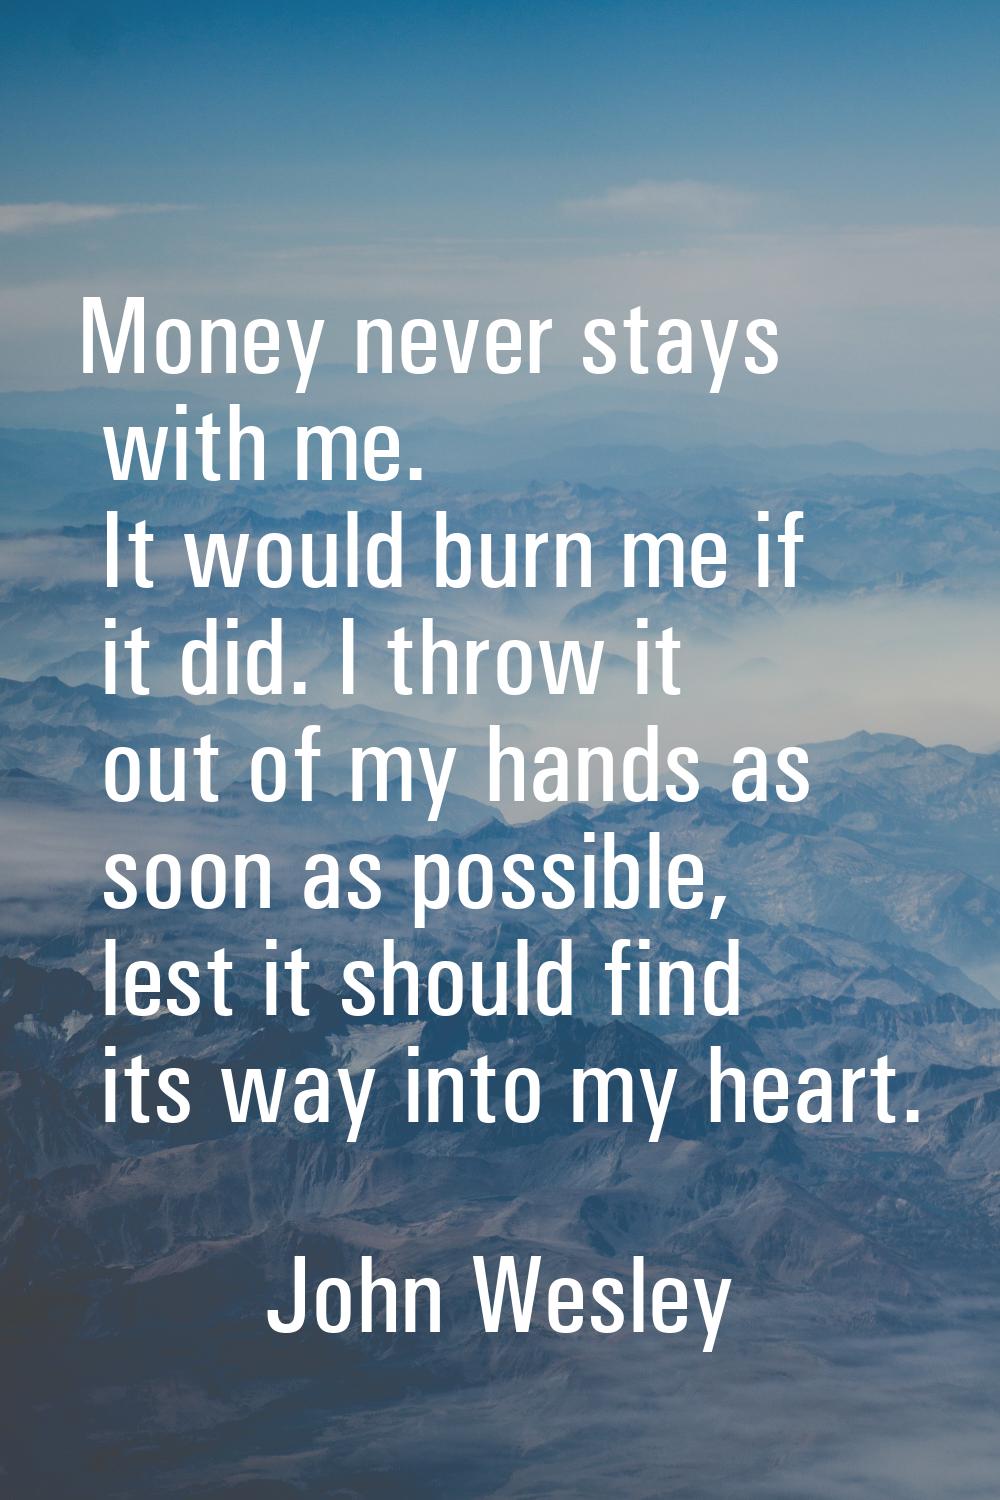 Money never stays with me. It would burn me if it did. I throw it out of my hands as soon as possib